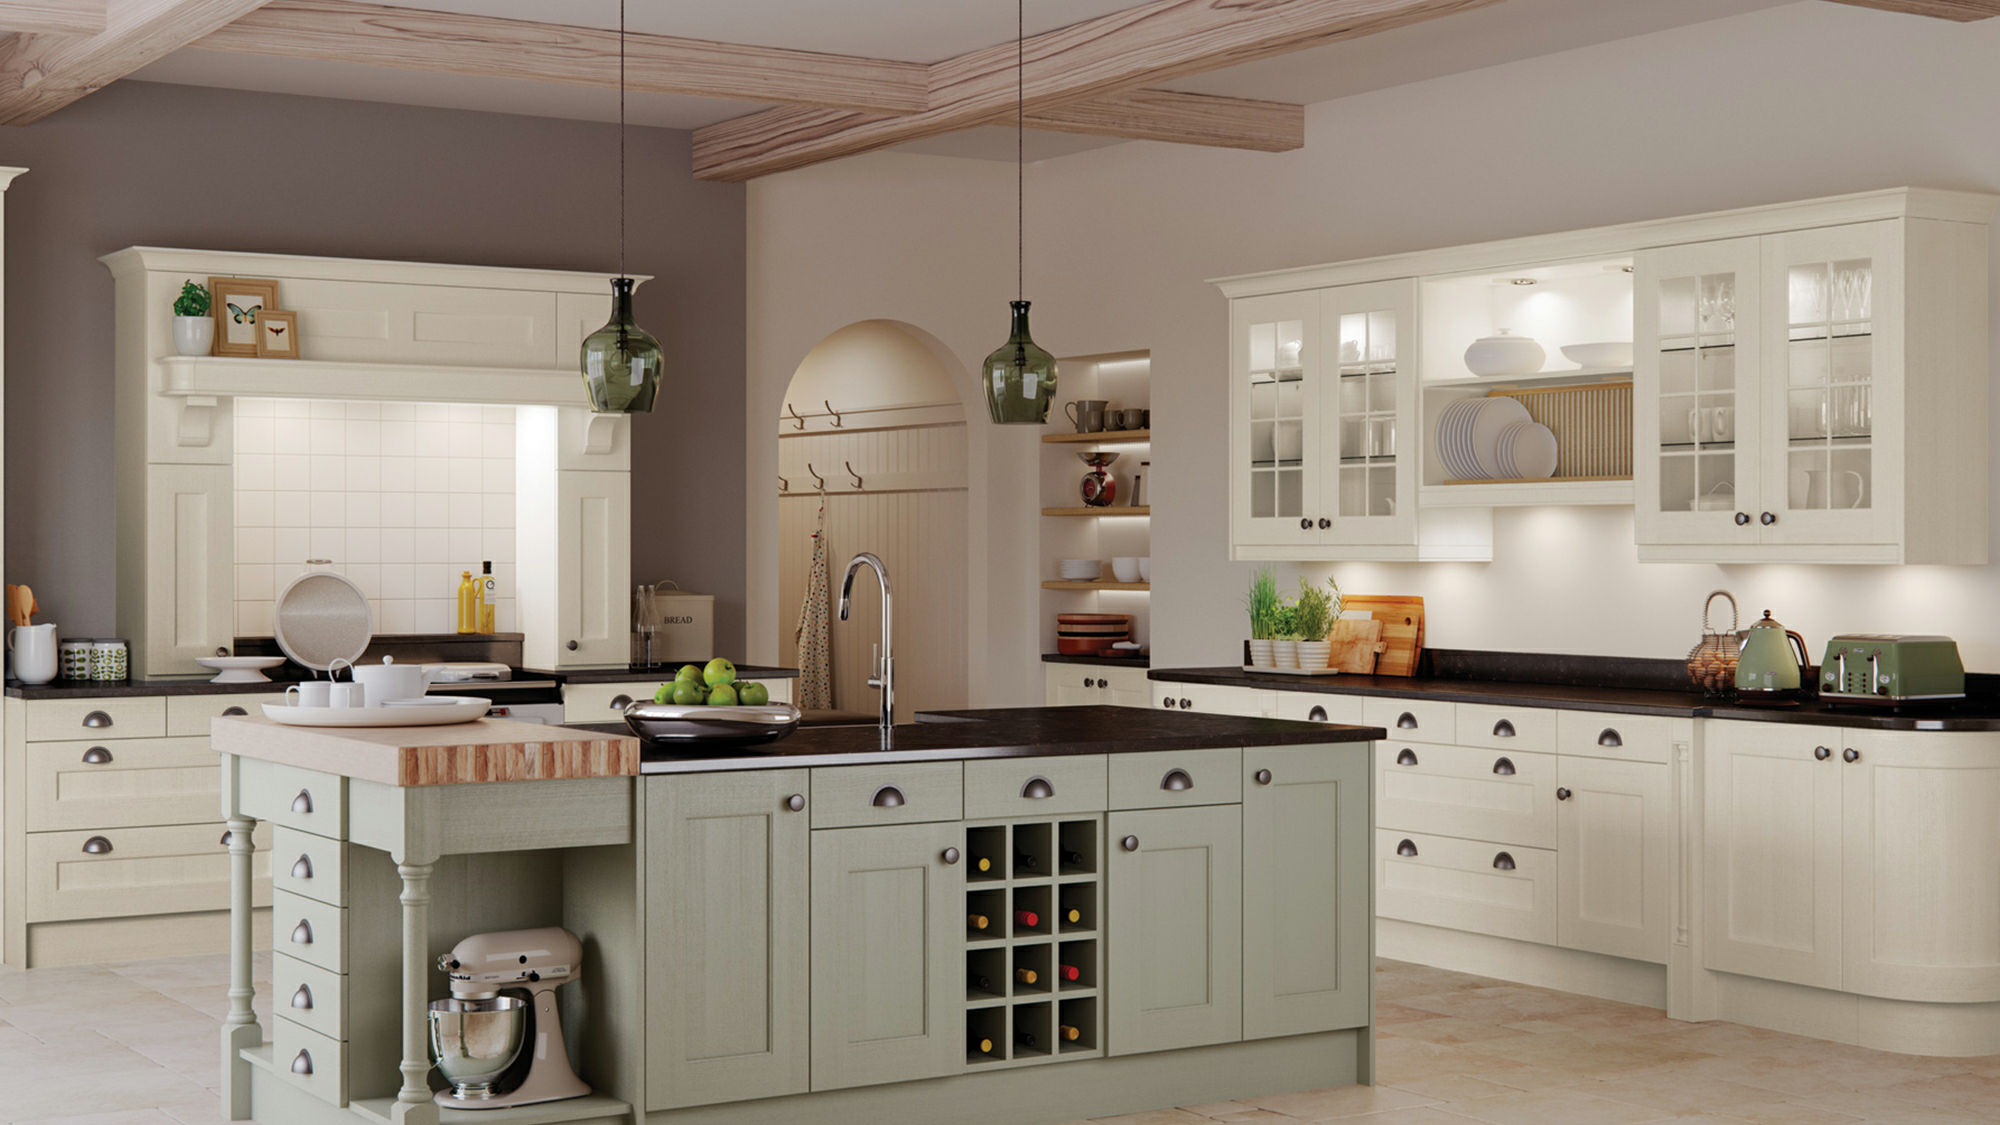 Wakefield Solid Wood Sage Green kitchens featuring artisanal quality in a soothing sage green hue